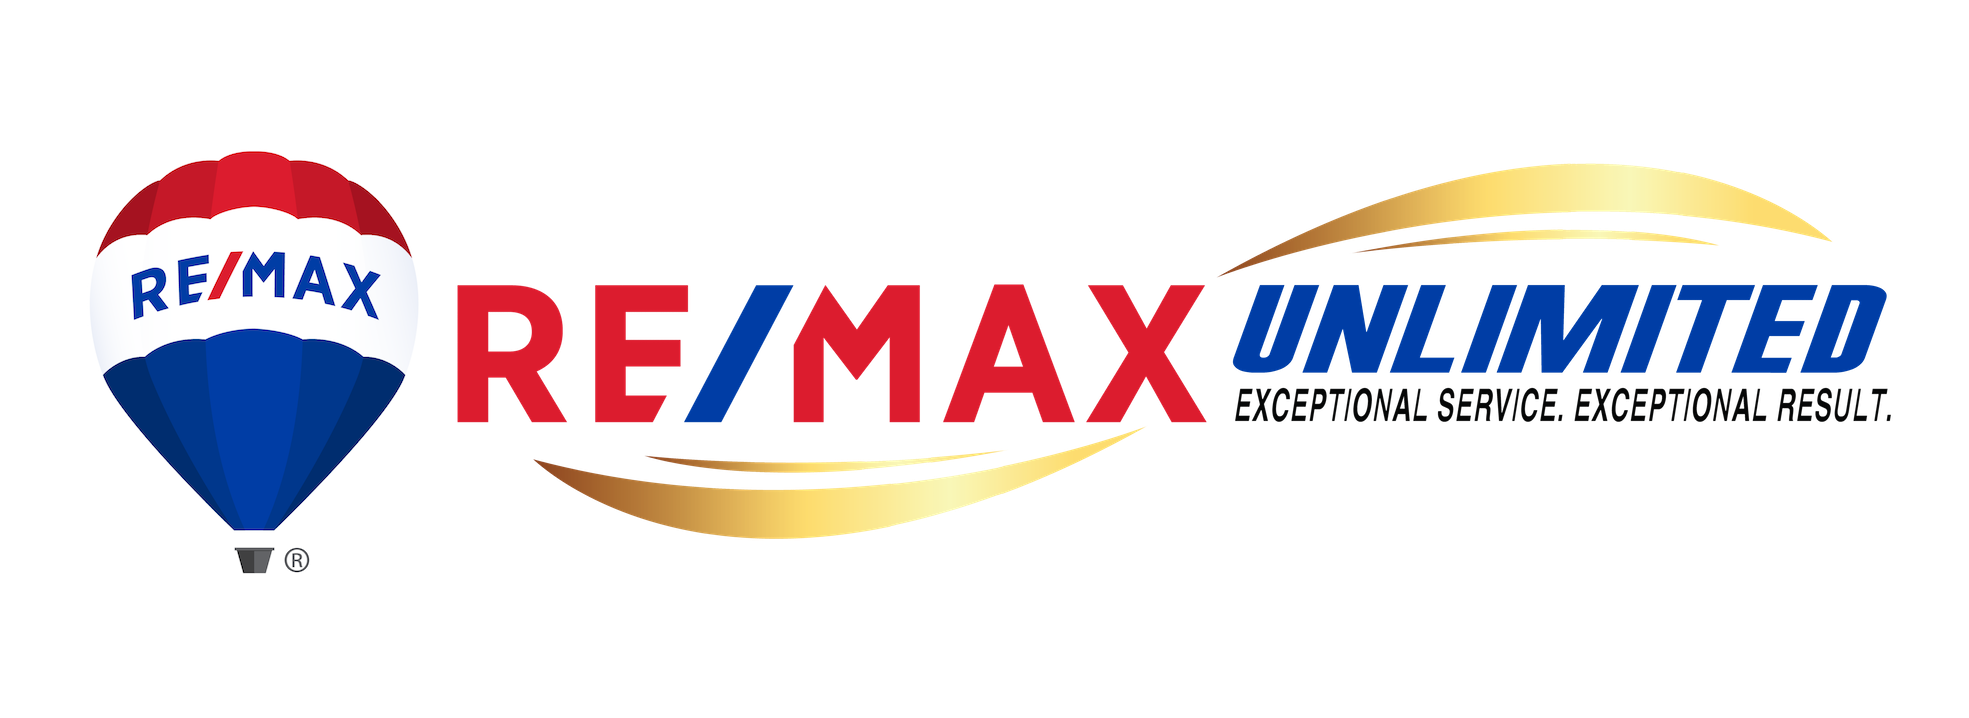 Remax Unlimited